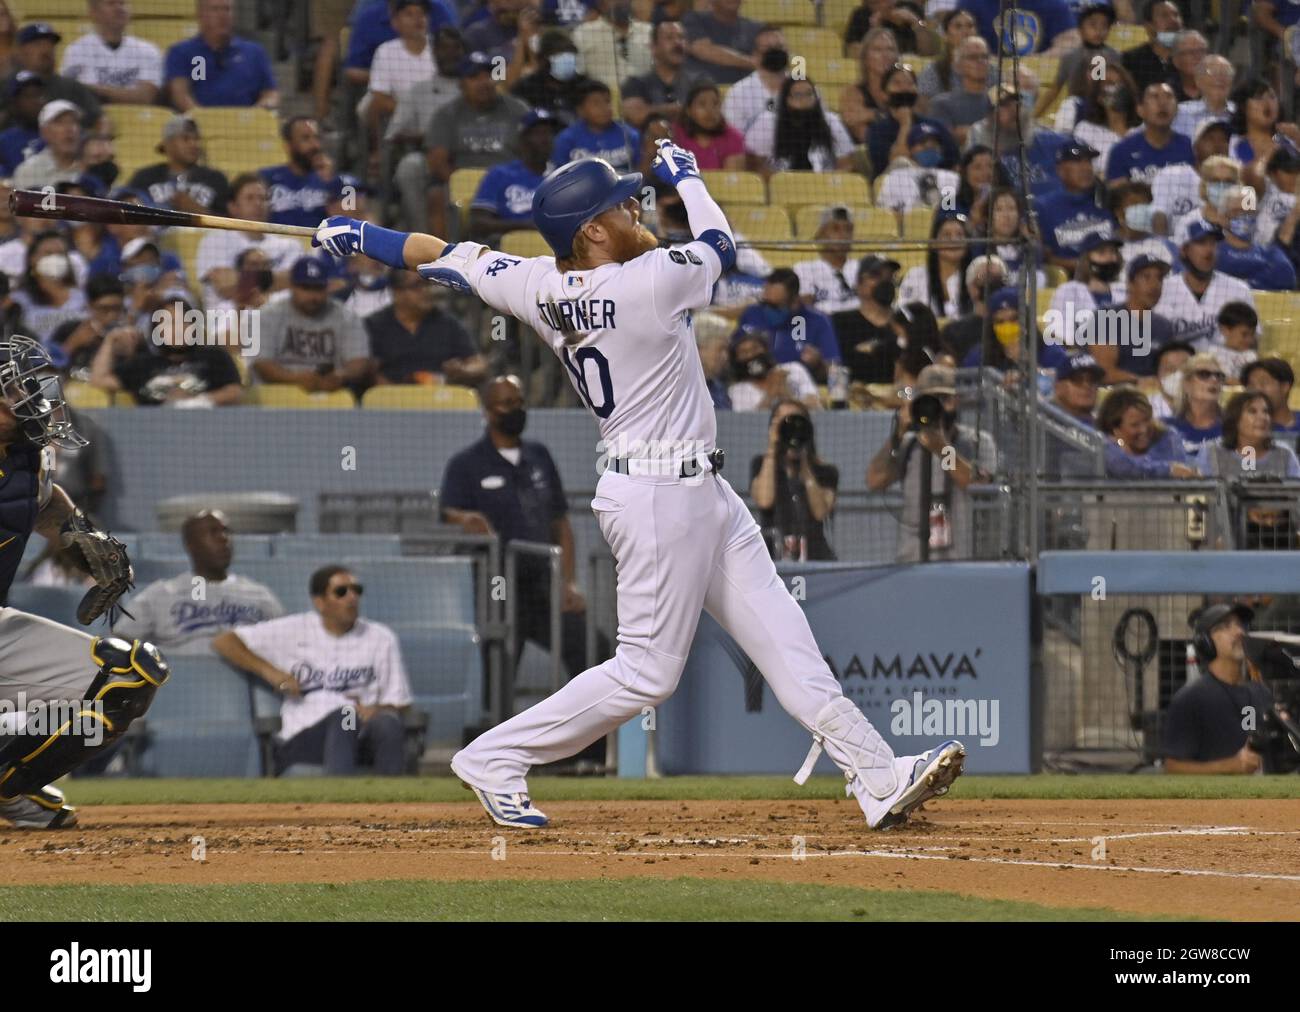 Los Angeles, United States. 03rd Oct, 2021. Los Angeles Dodgers' Justin Turner smashes three-run home run off Milwaukee Brewers' starting pitcher Corbin Burnes, a leading Cy Young Award candidate, to snatch a lead they wouldn't relinquish during the first inning at Dodger Stadium in Los Angeles on Saturday, October 2, 2021. Credit: UPI/Alamy Live News Stock Photo